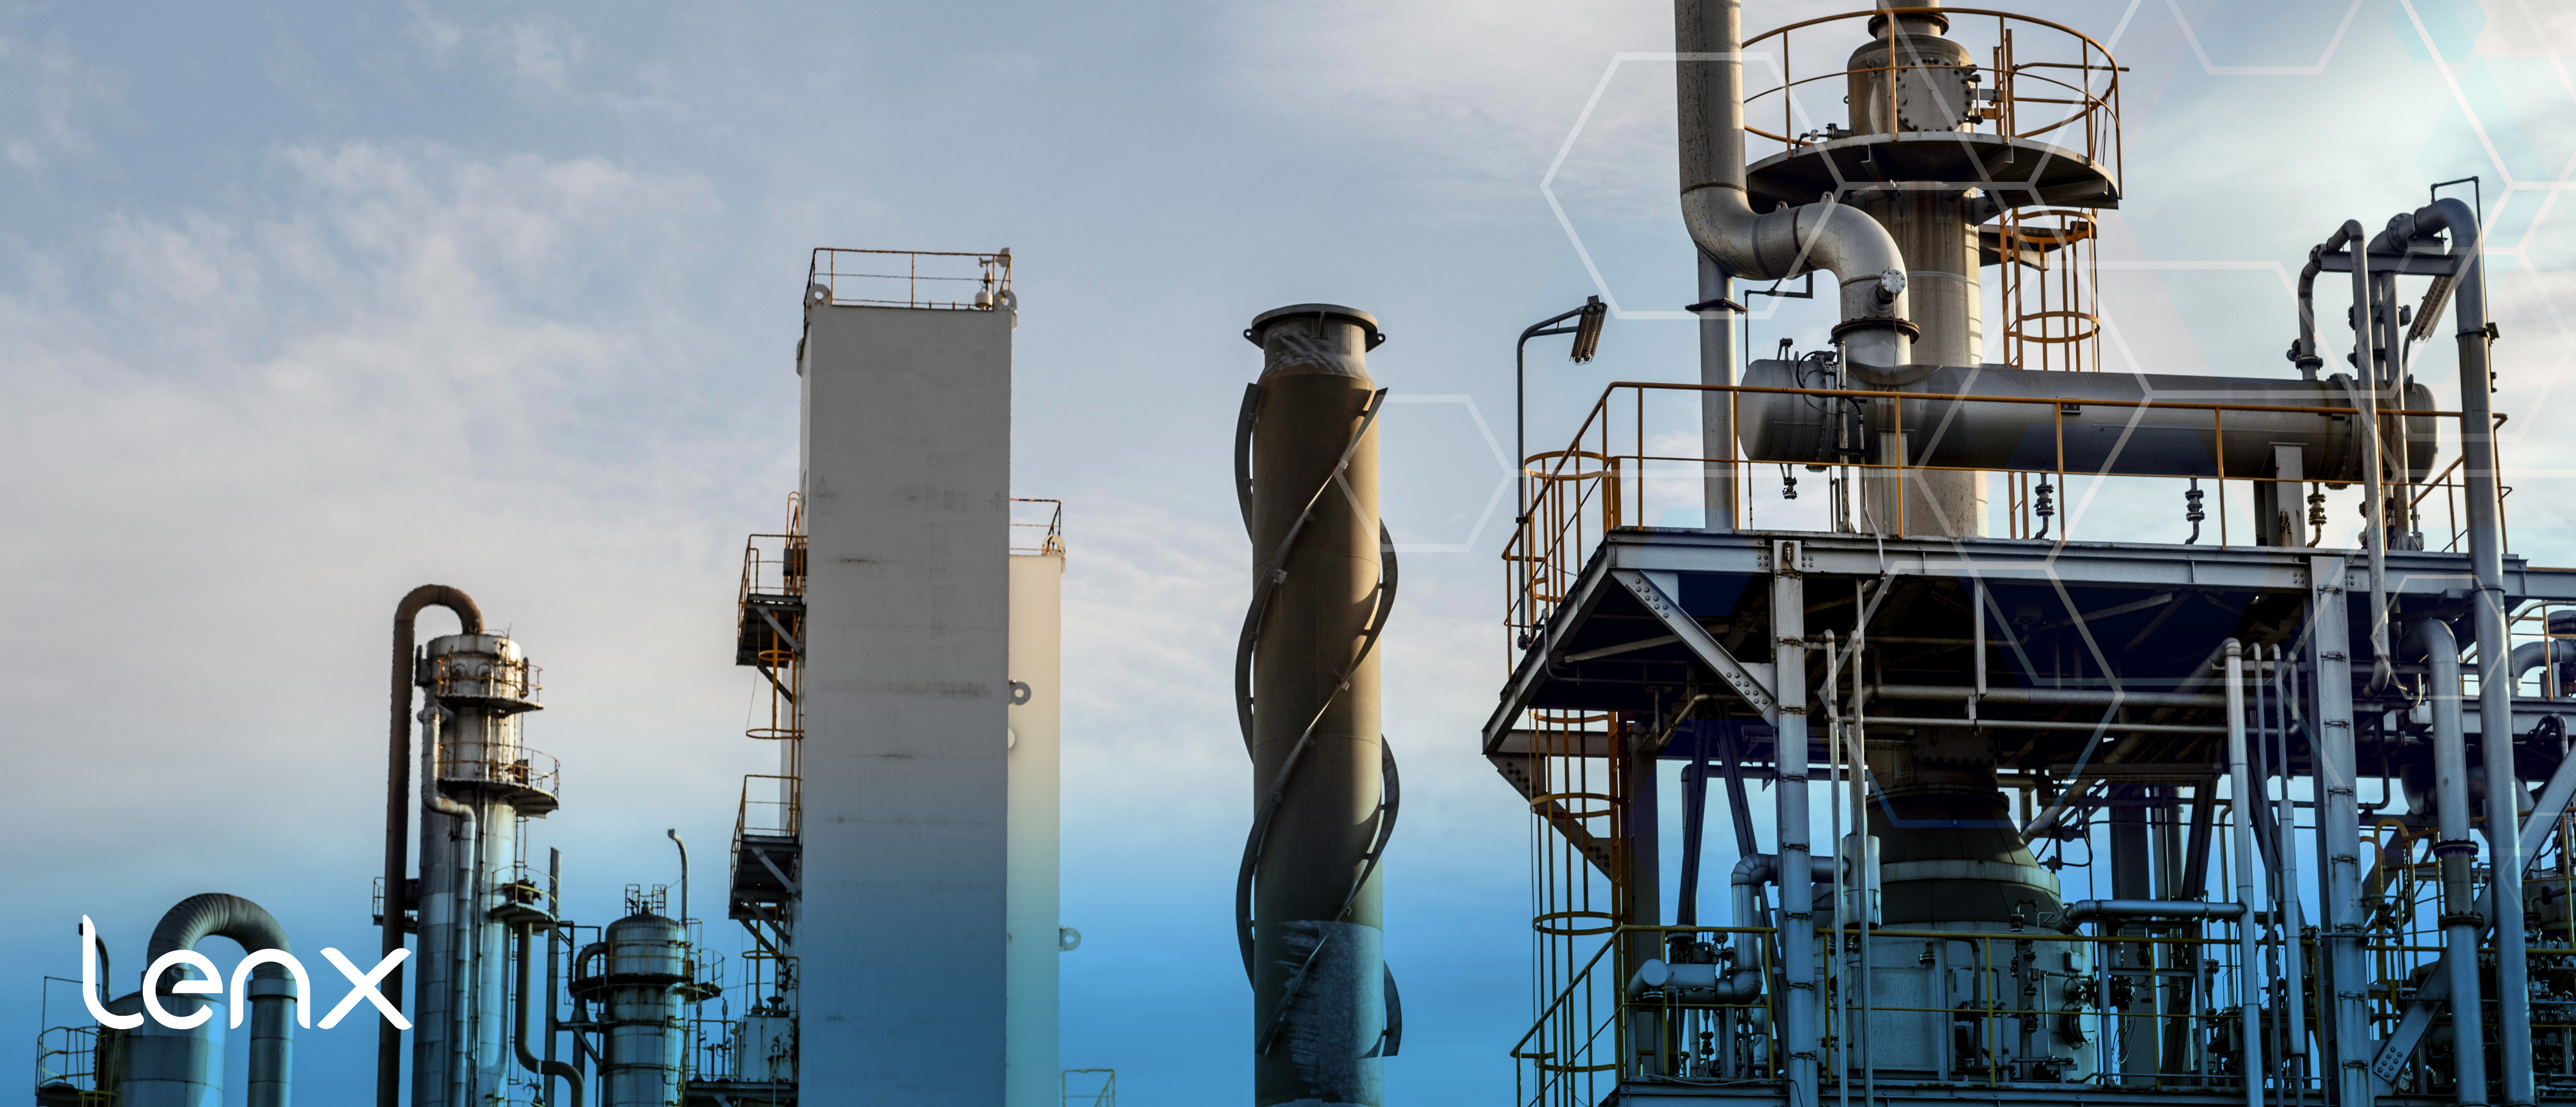 AI Security and Active Shooter Detection for Plants and Refineries